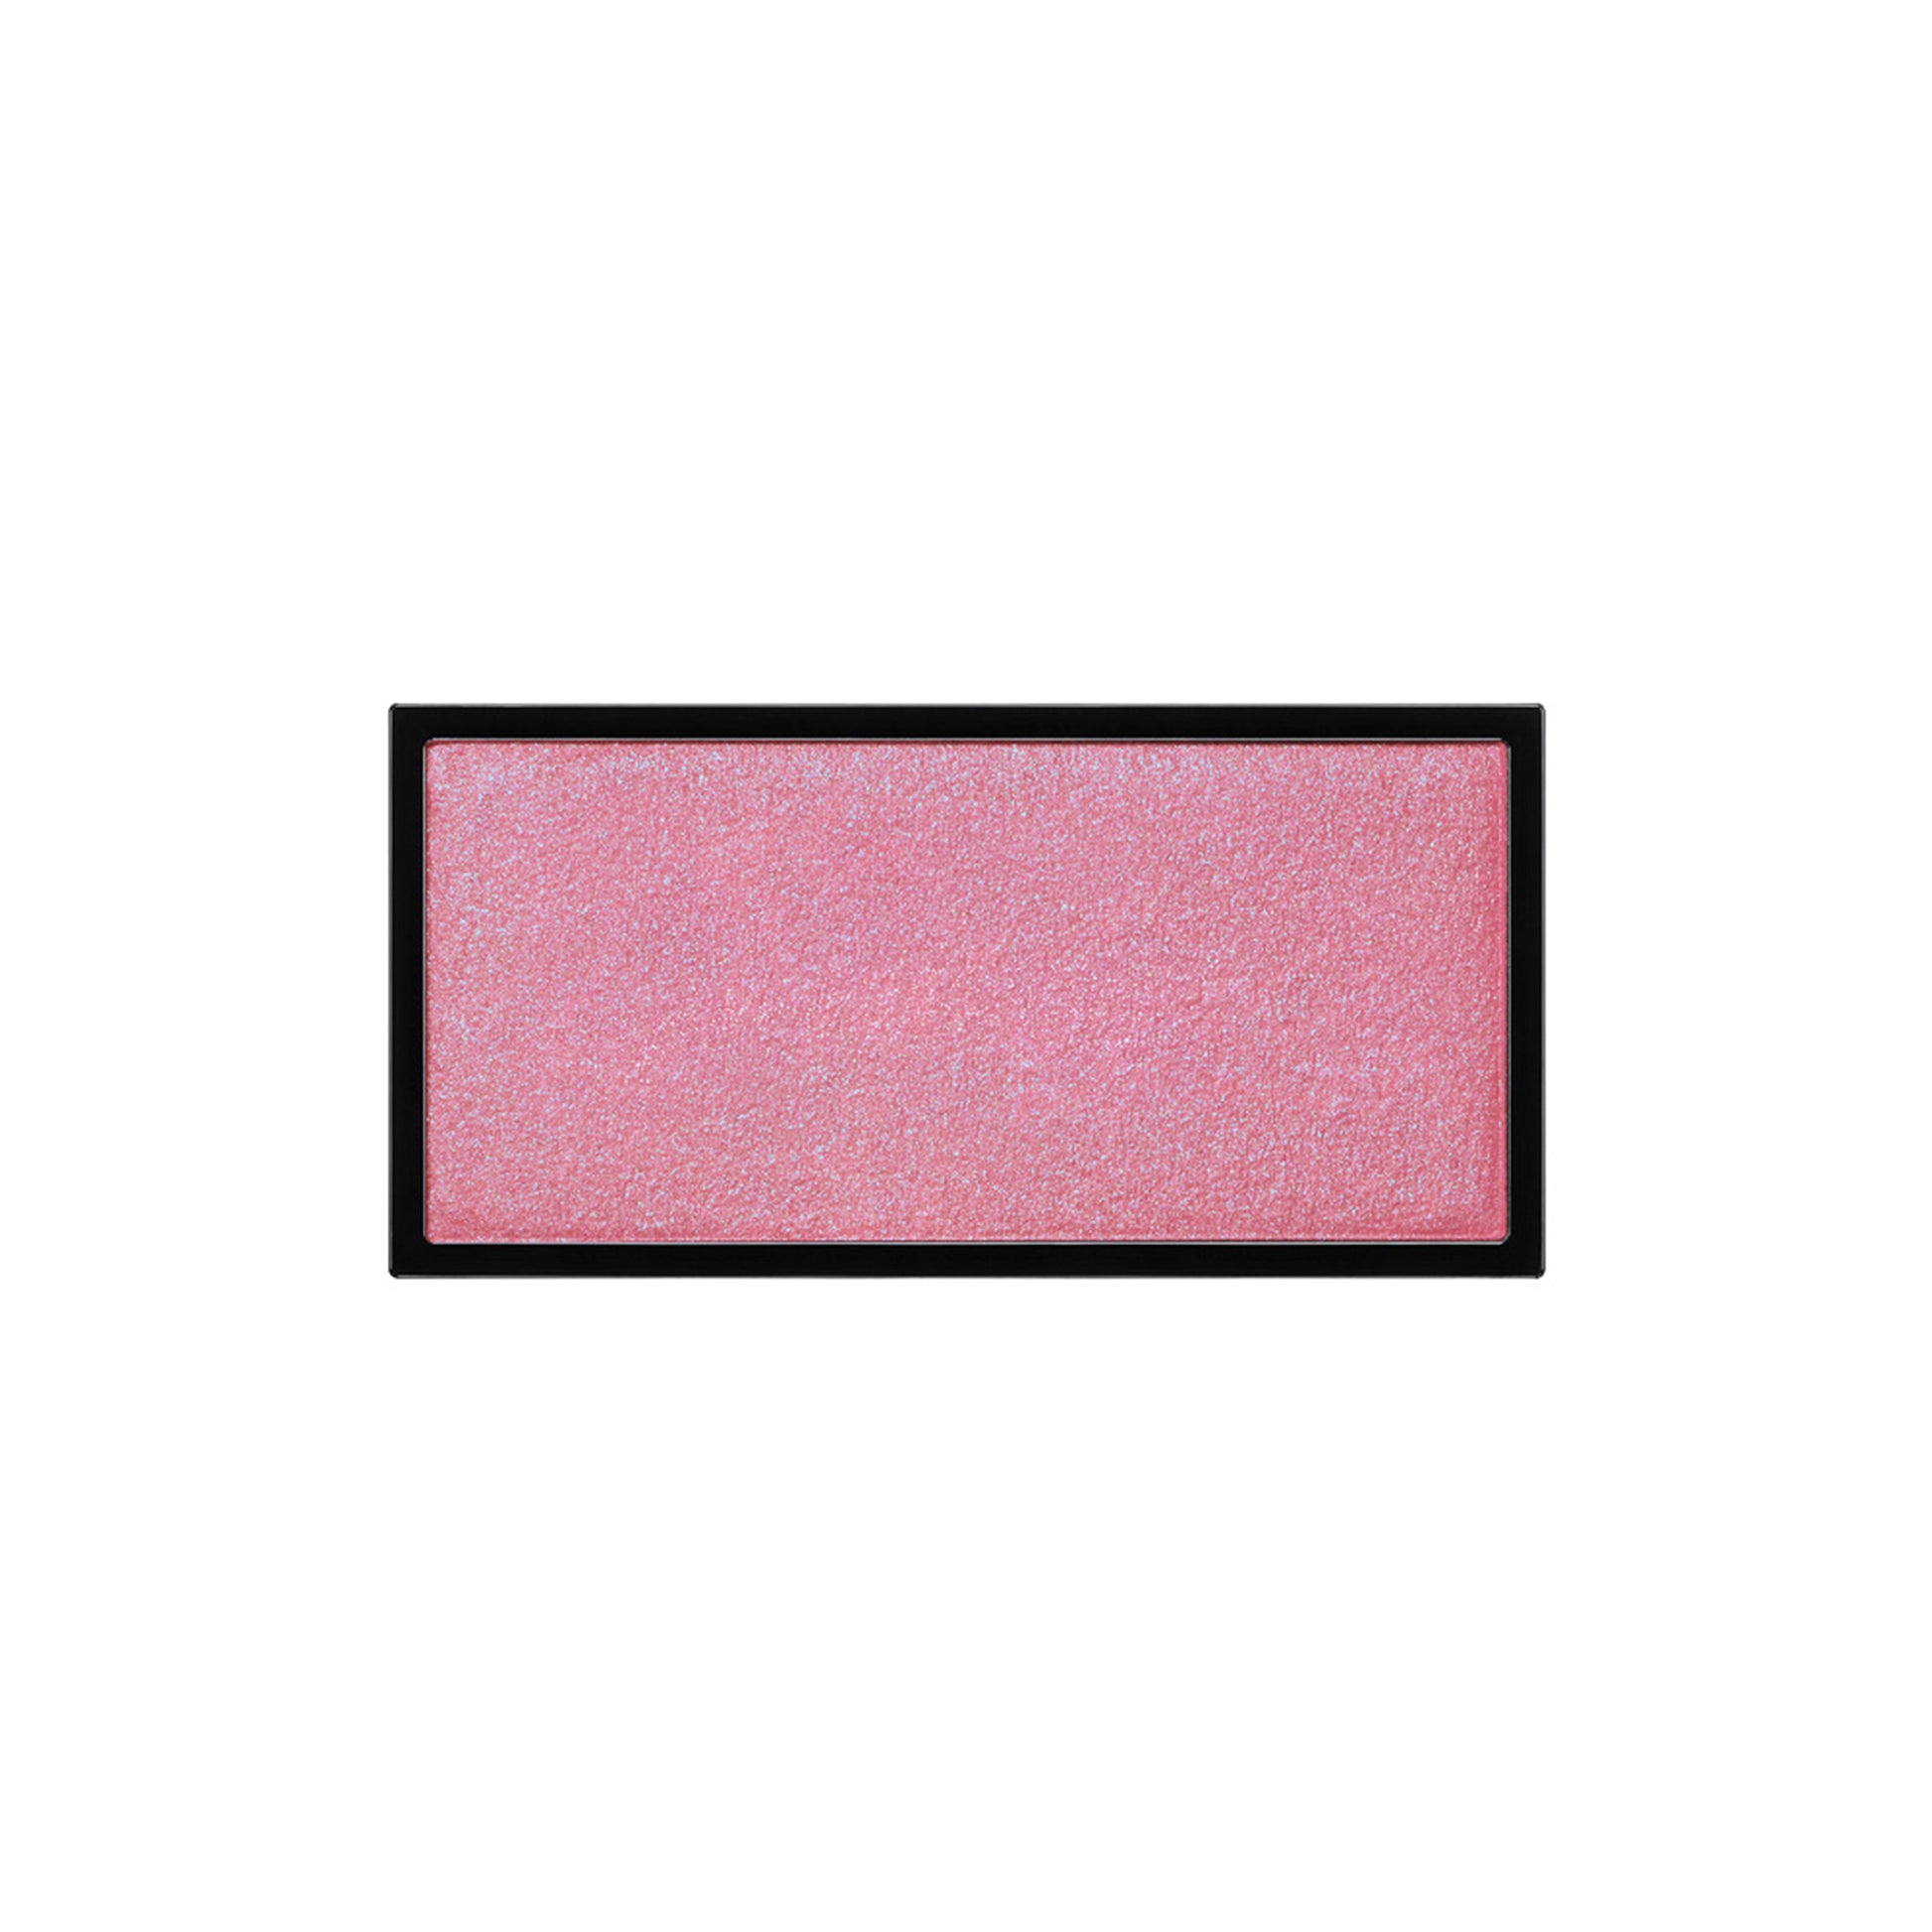 A rectangle shaped powder blush pan in a cool toned pink with a hint of purple